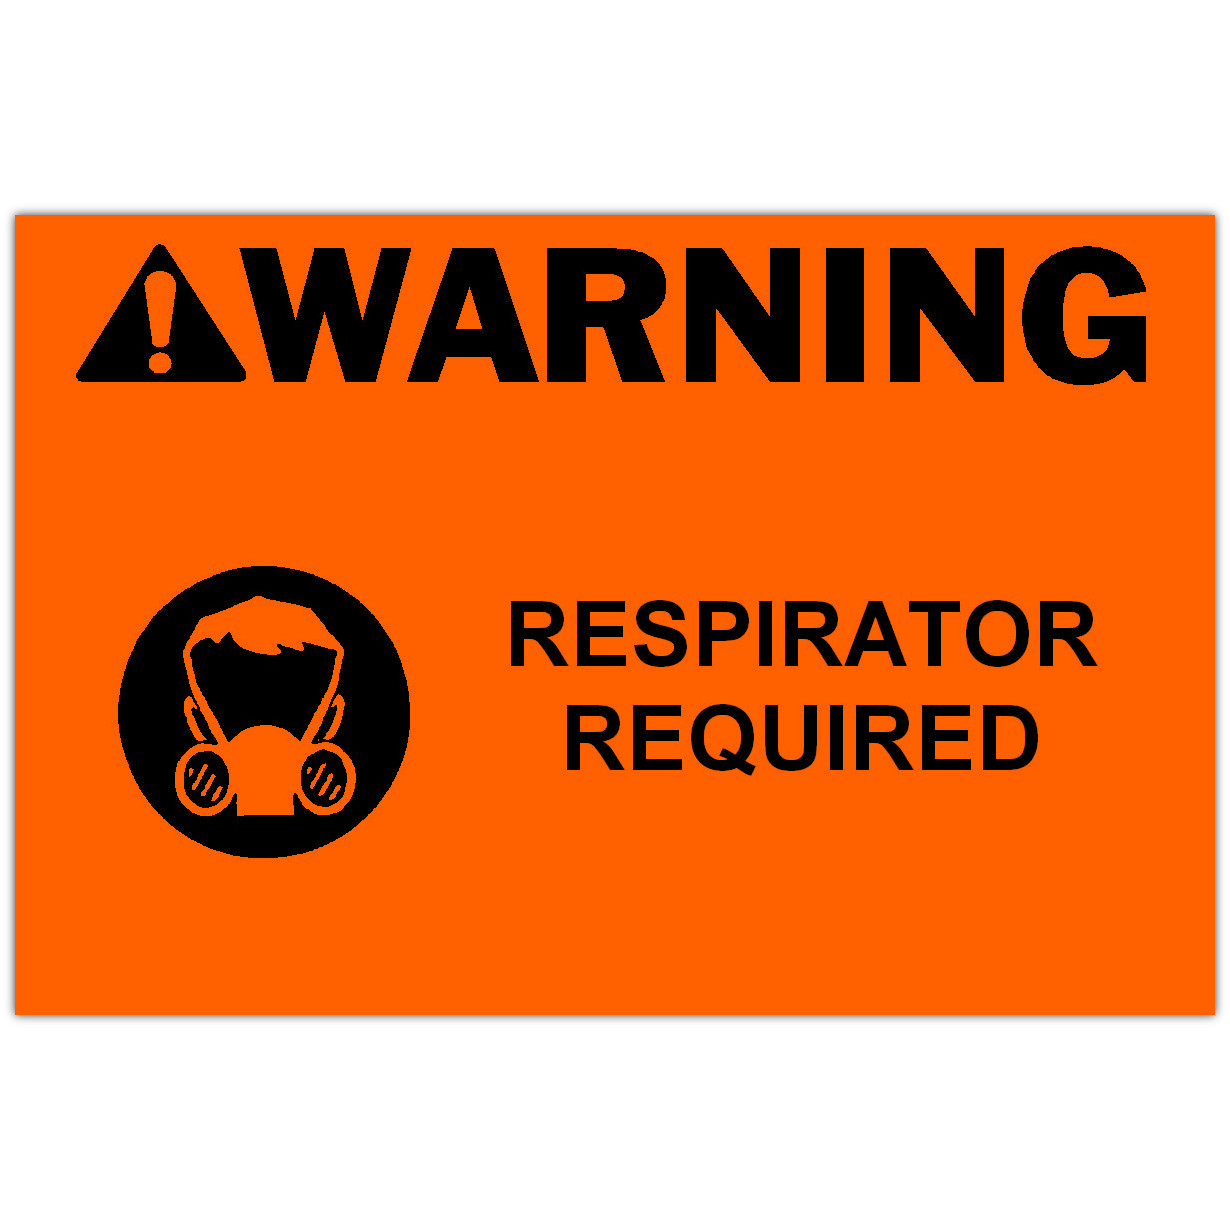 Ask a question about 4" x 6" WARNING Respirator Required Safety Label